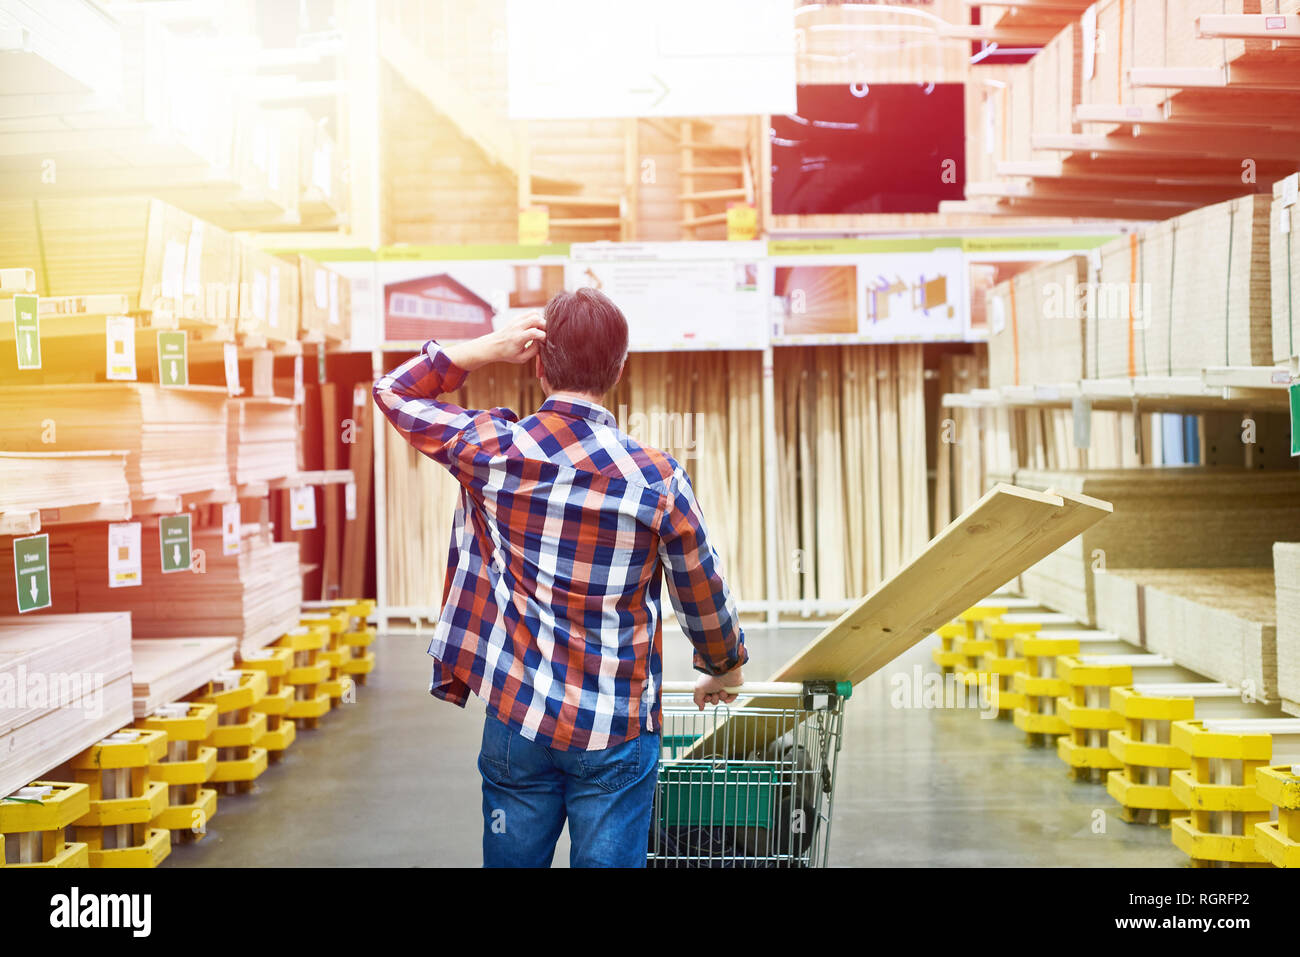 Man chooses and buys plywood and boards in a construction supermarket Stock Photo